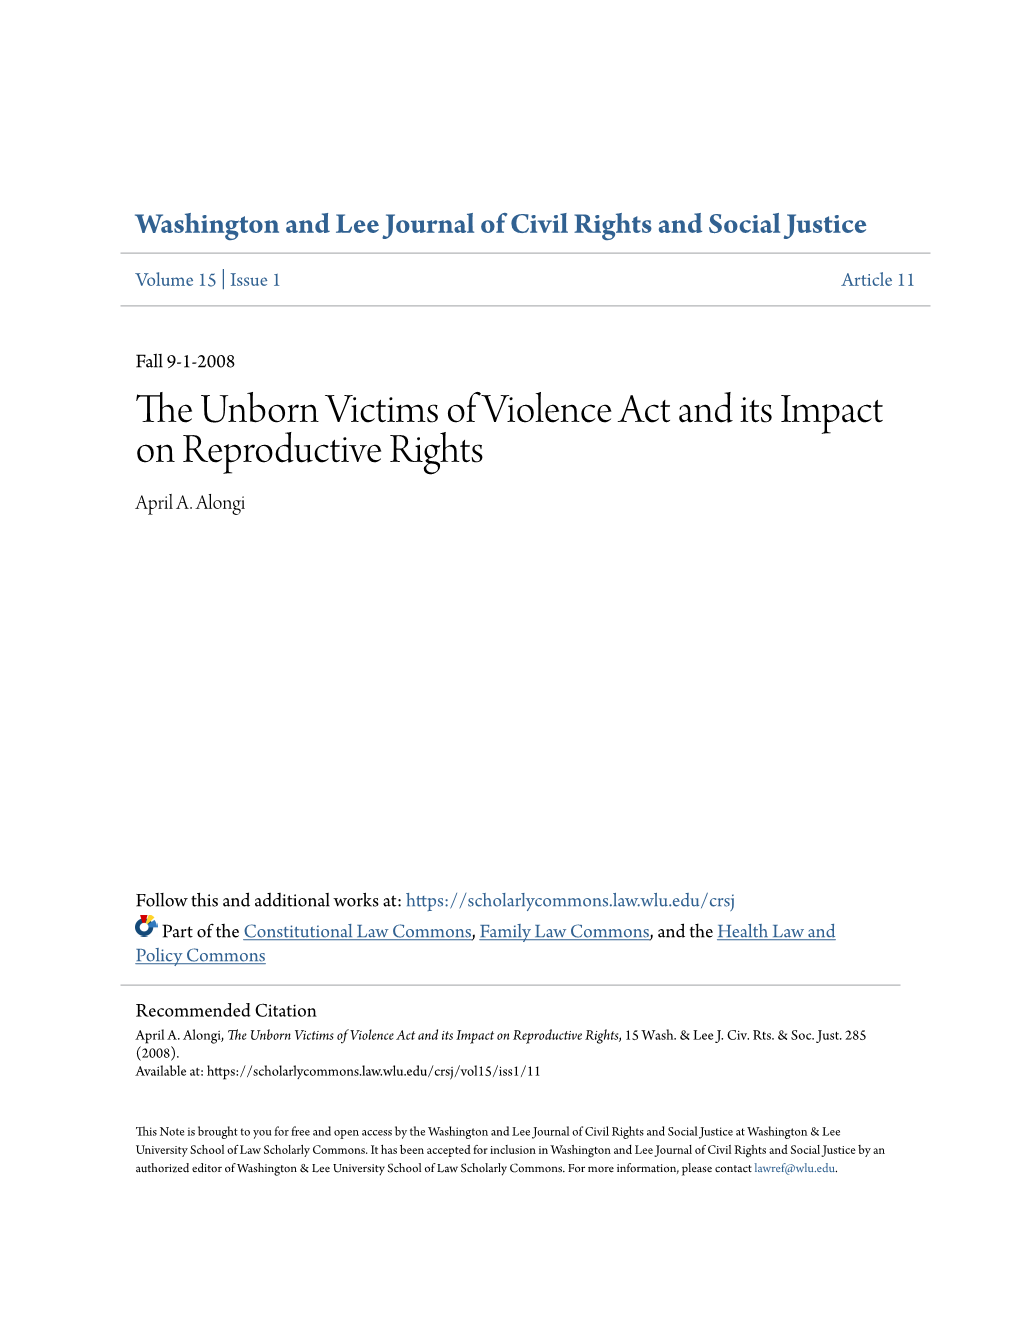 The Unborn Victims of Violence Act and Its Impact on Reproductive Rights, 15 Wash